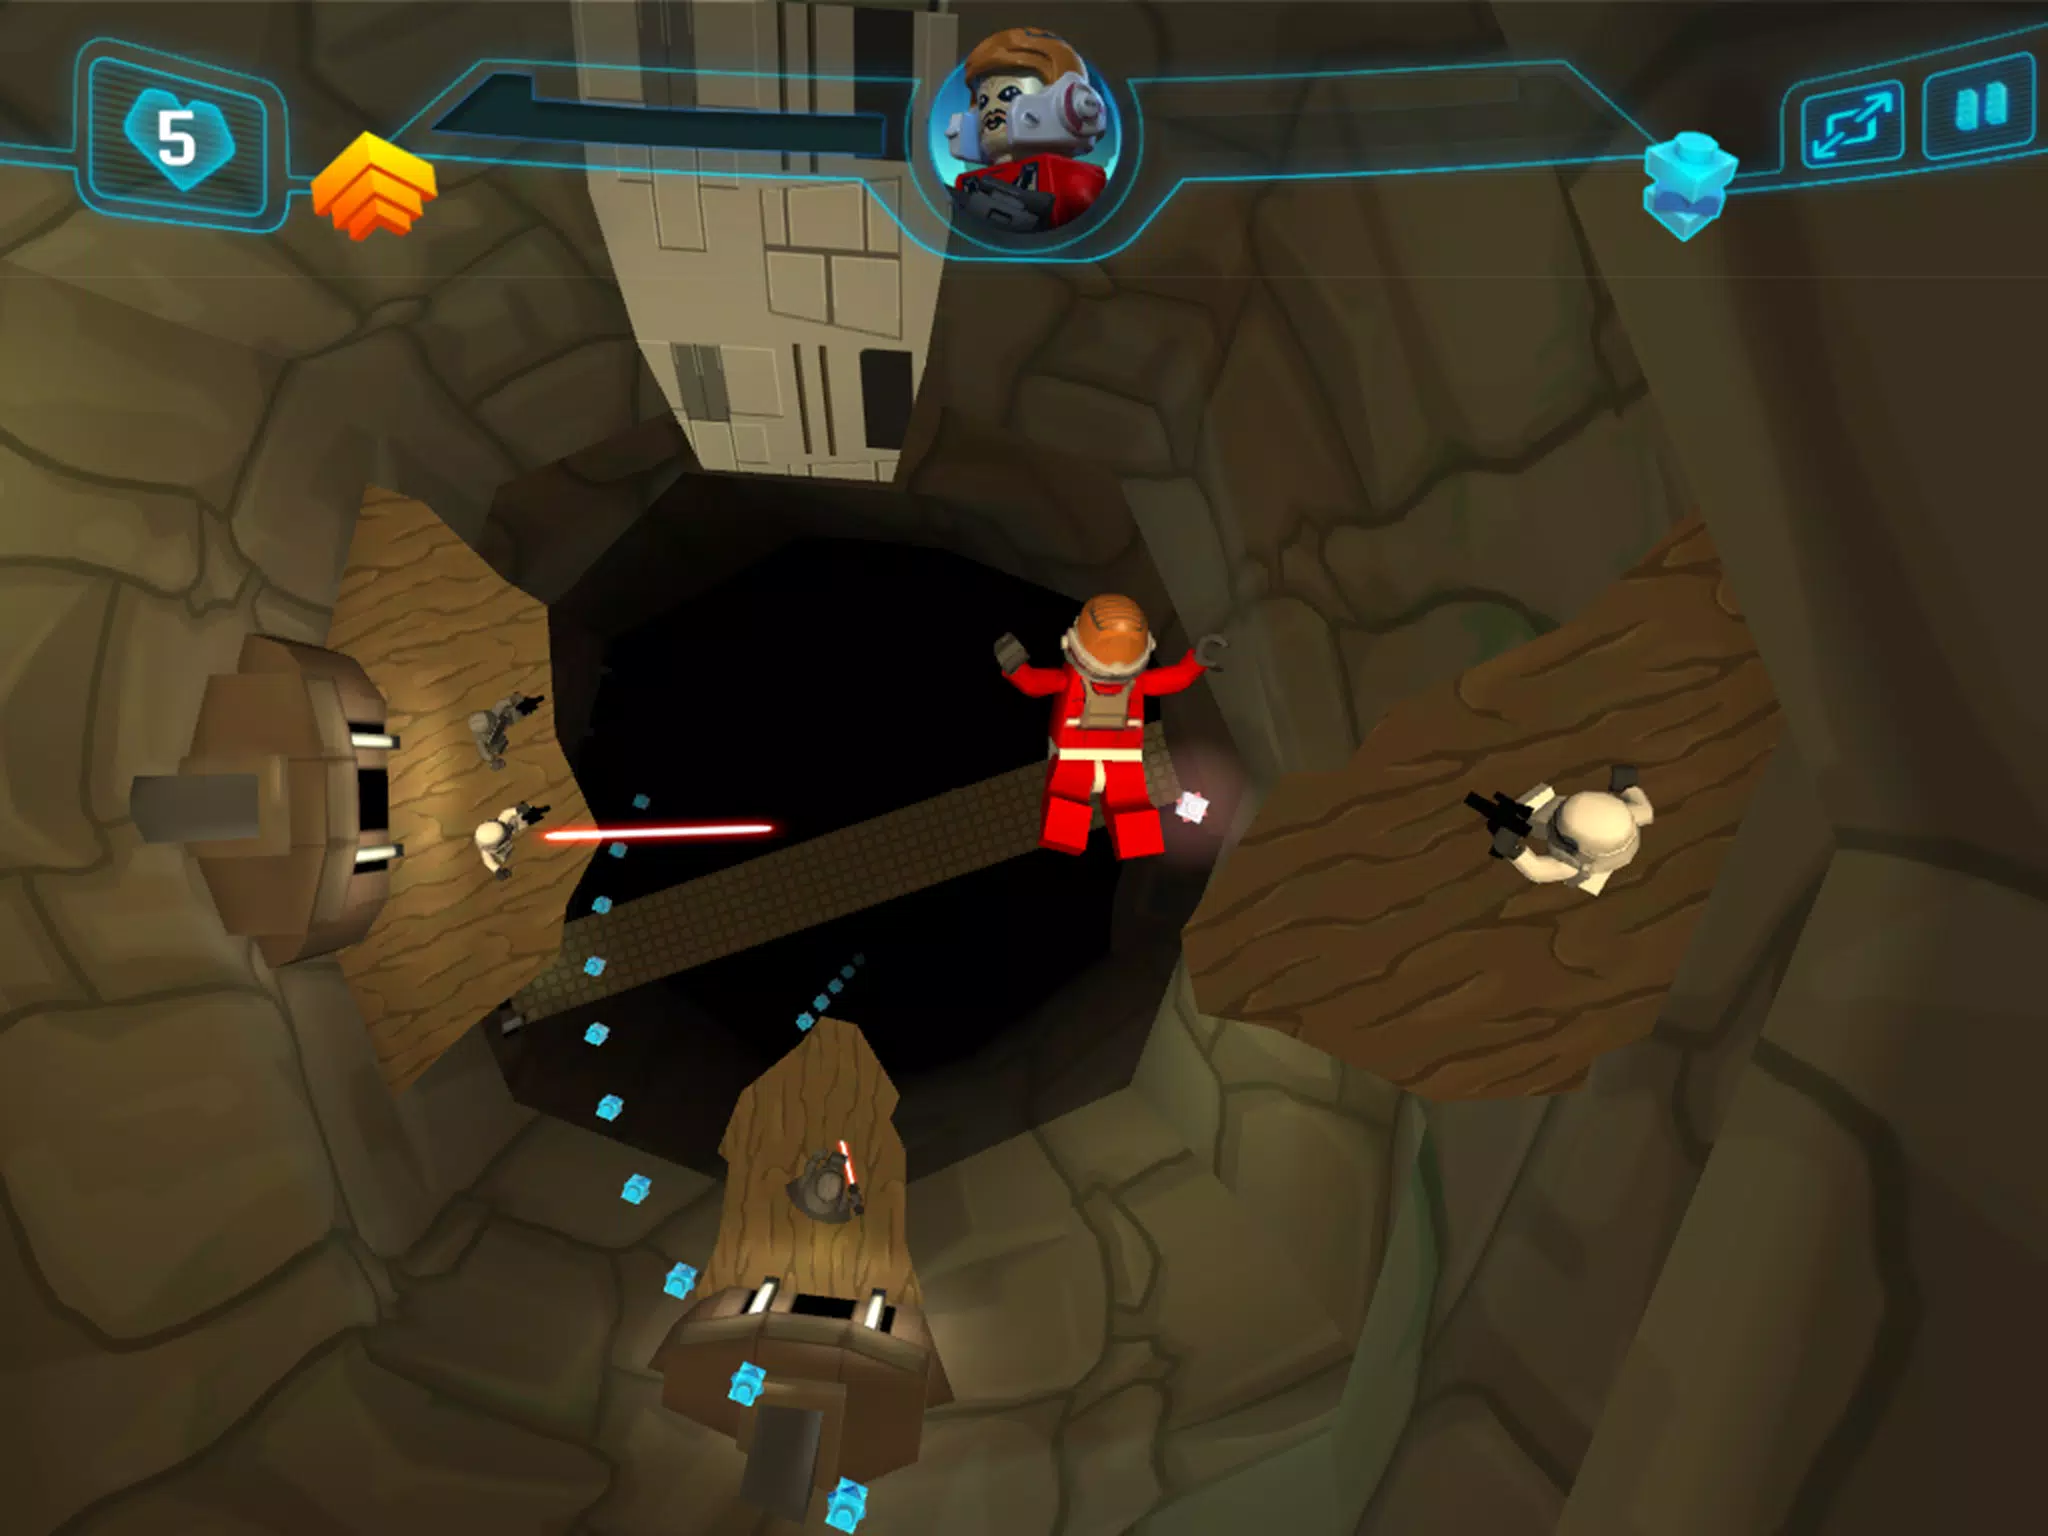 Lego Star Wars APK (Android App) - Free Download